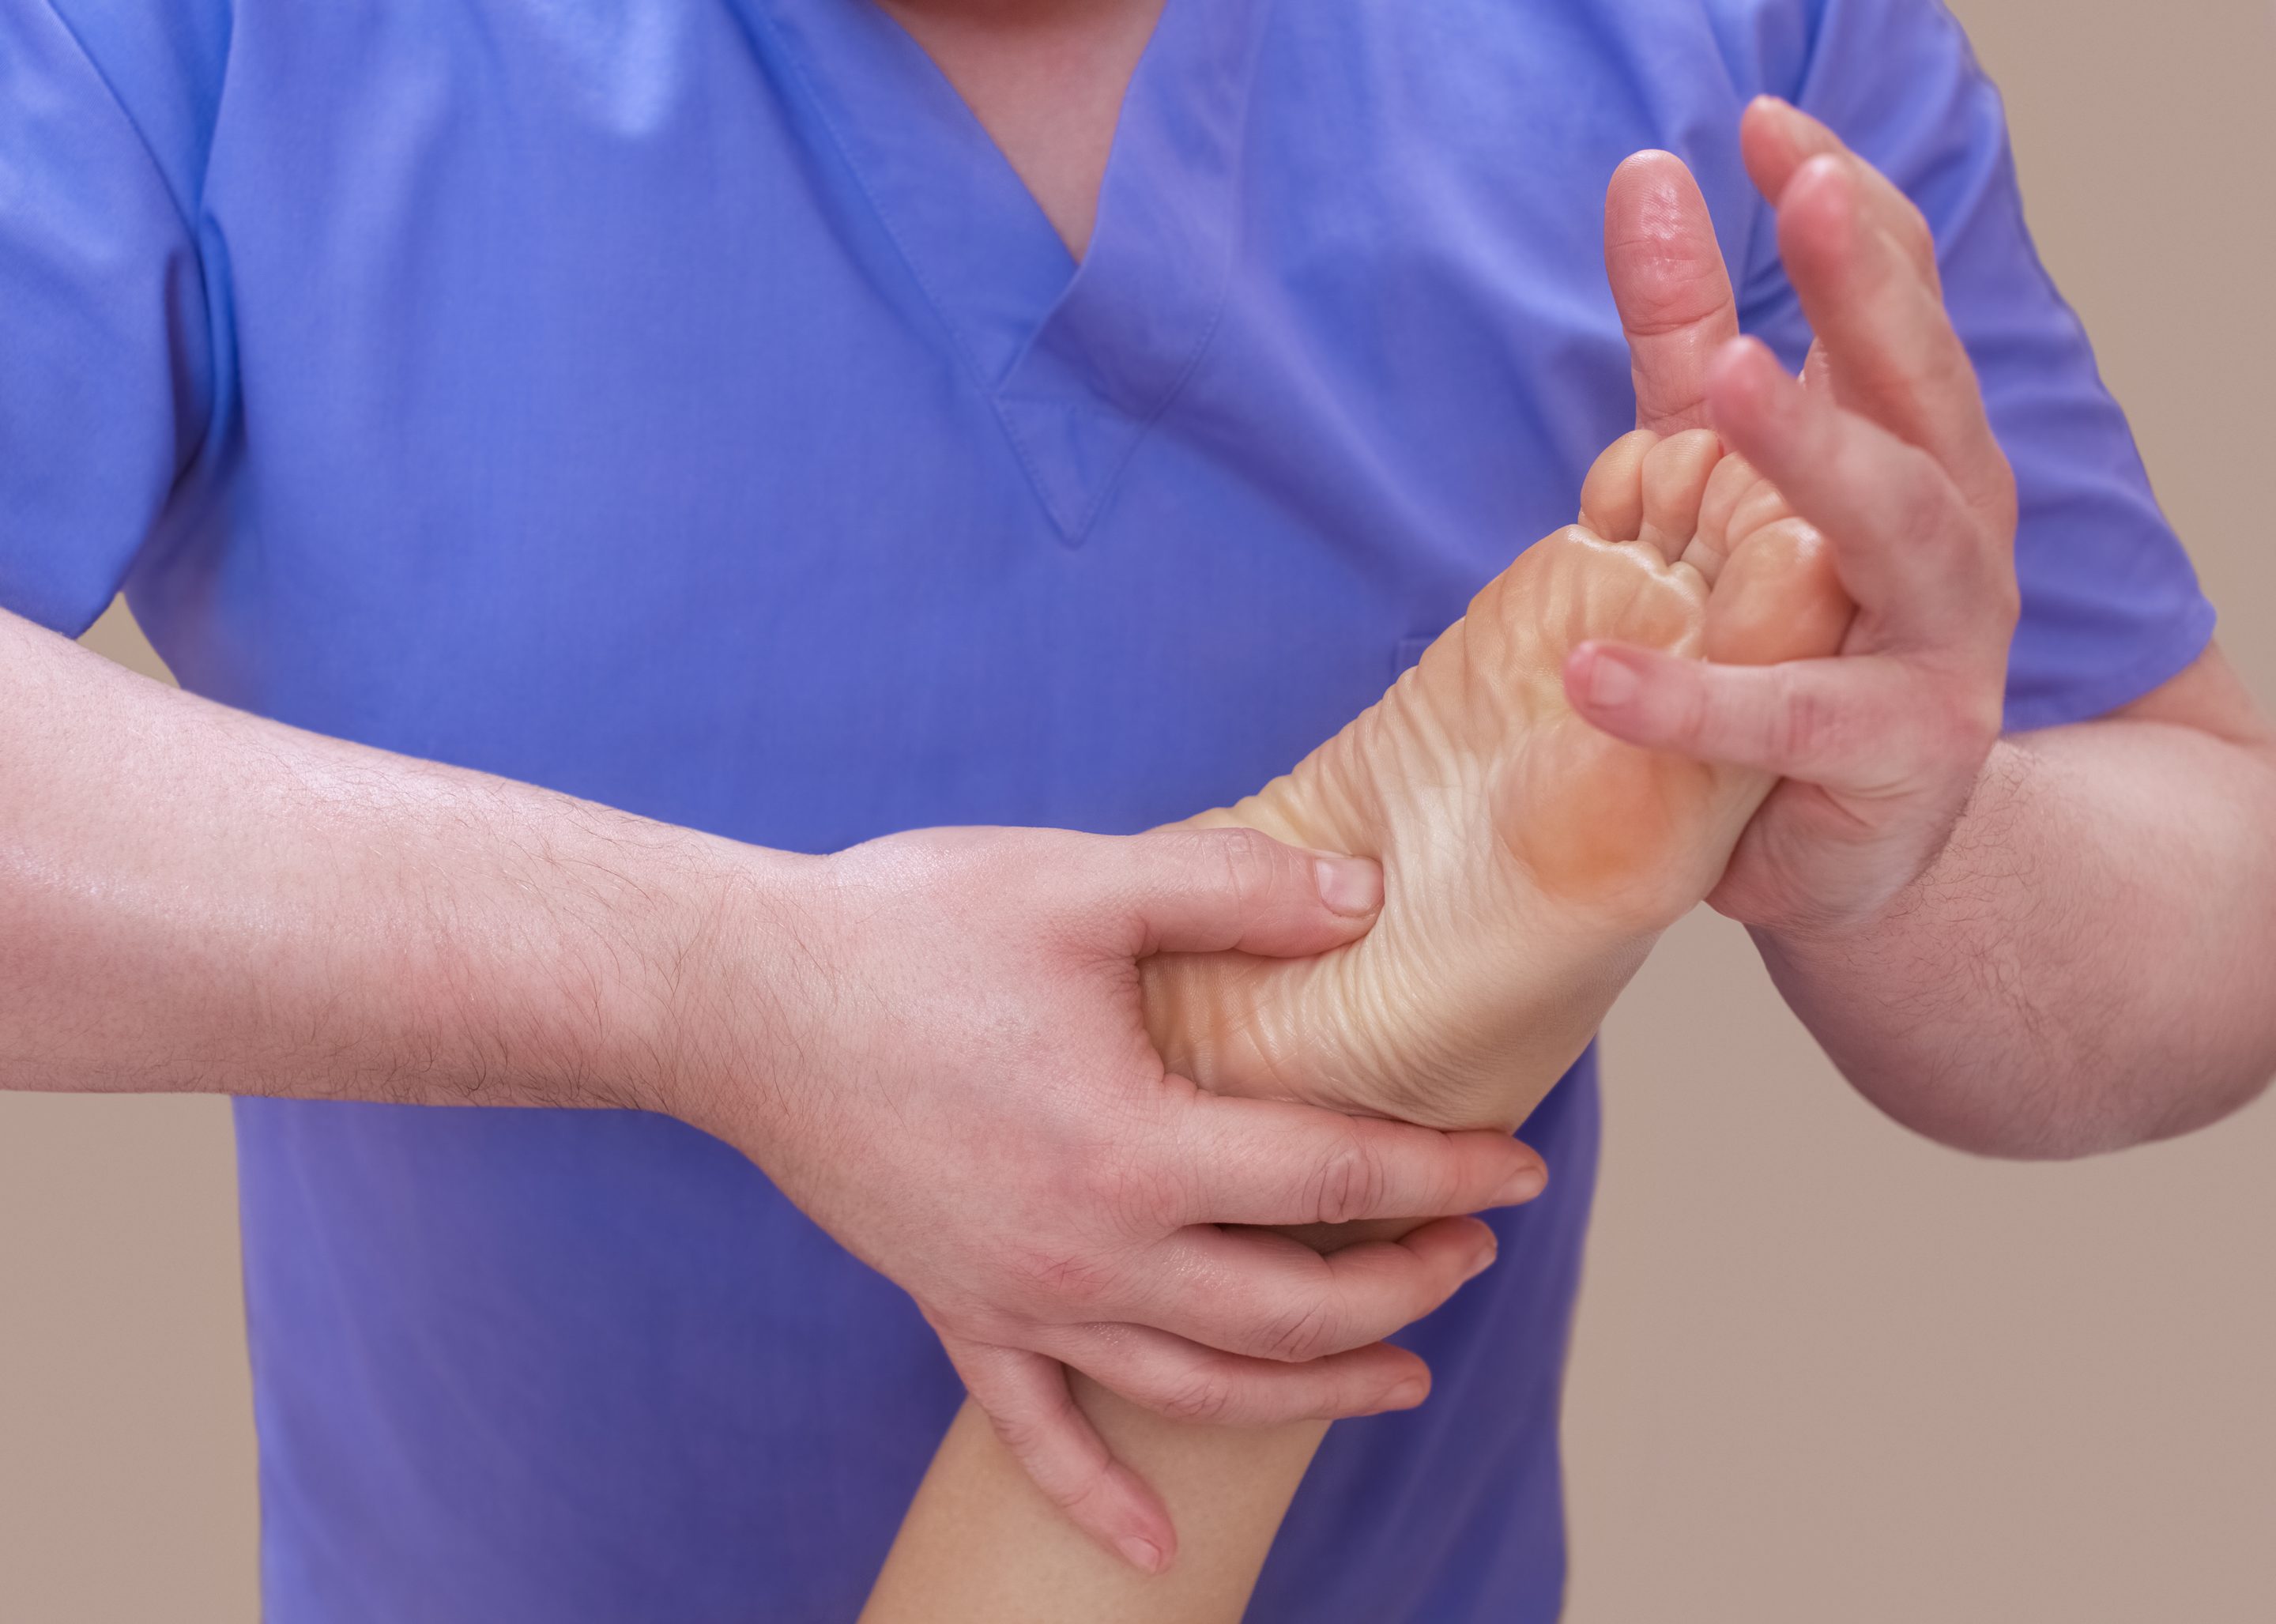 Doctor evaluating foot for plantar fasciitis and heel pain